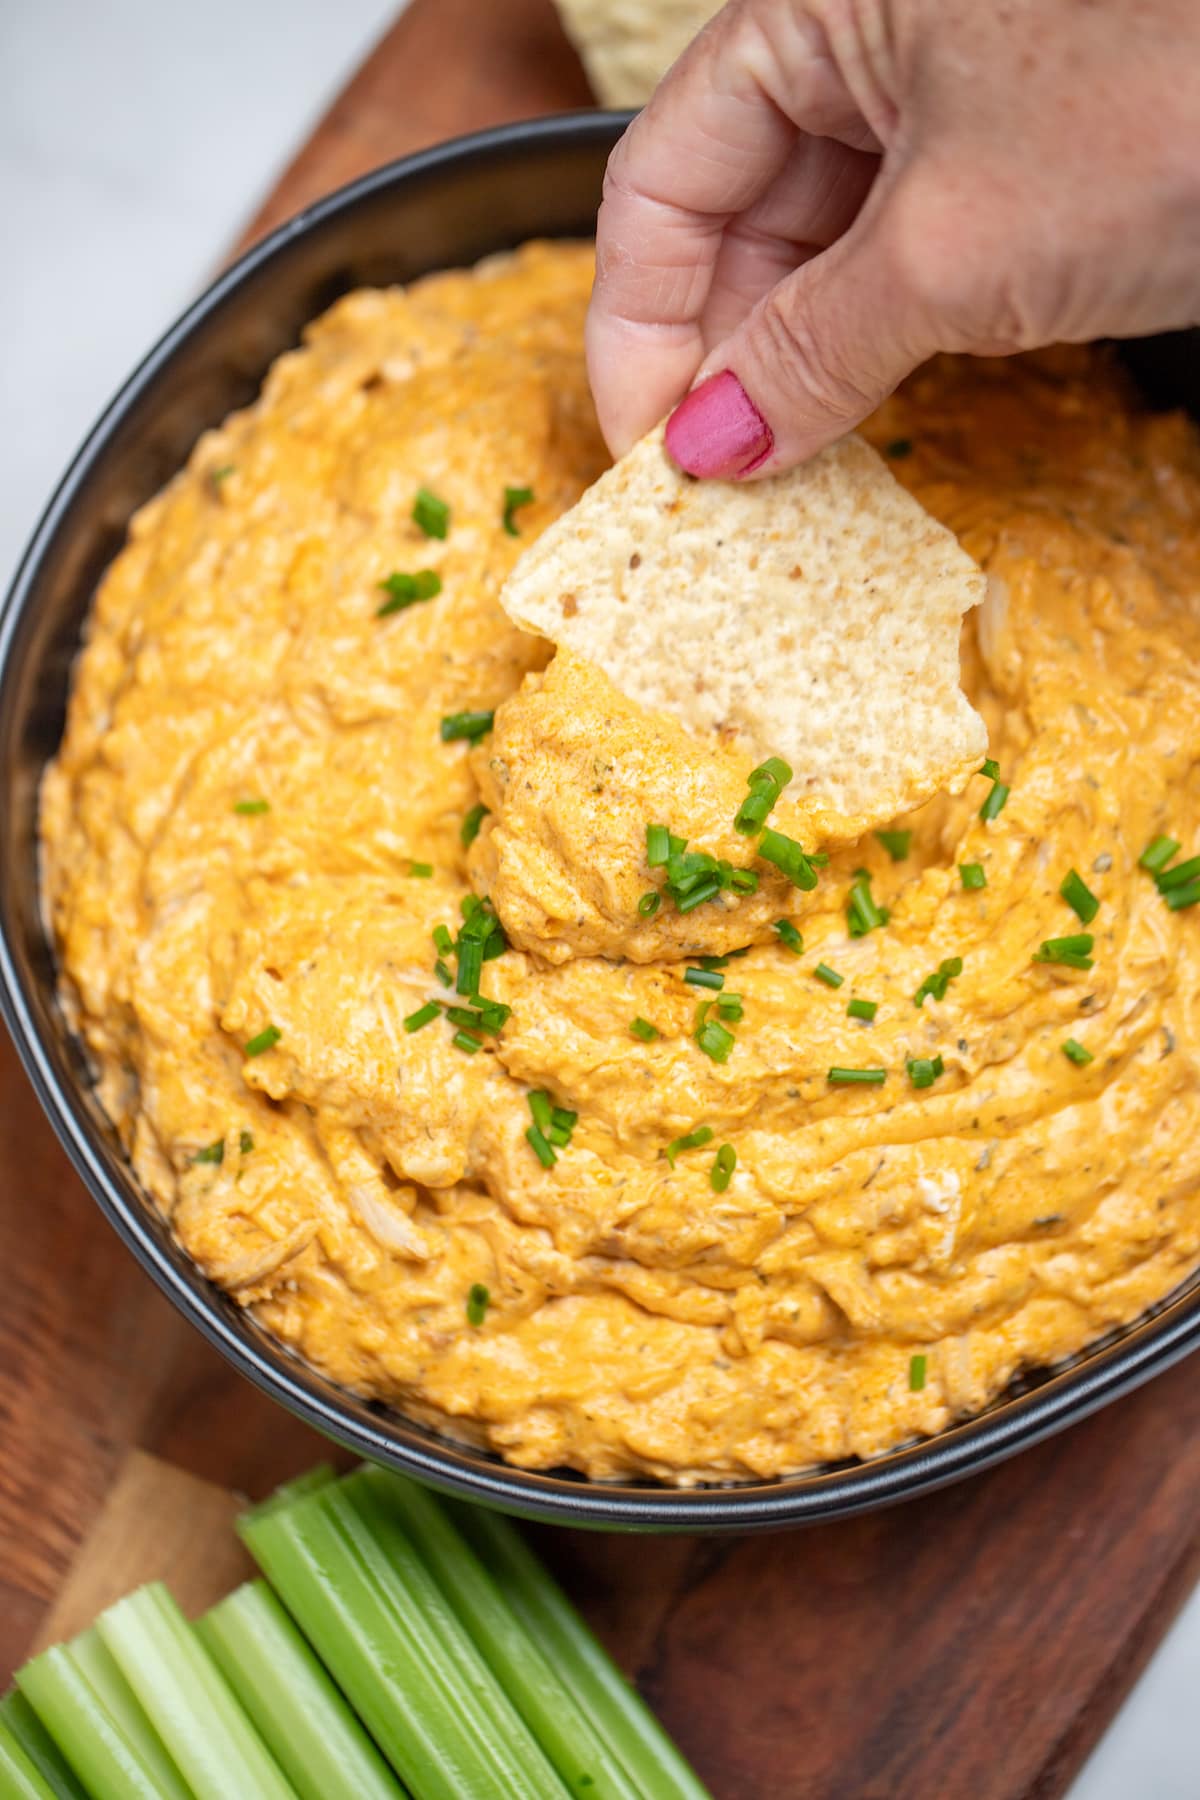 A bowl of slow cooker buffalo chicken dip topped with chives on a wooden cutting board next to celery and tortilla chips, with a hand dipping a chip into the dip.